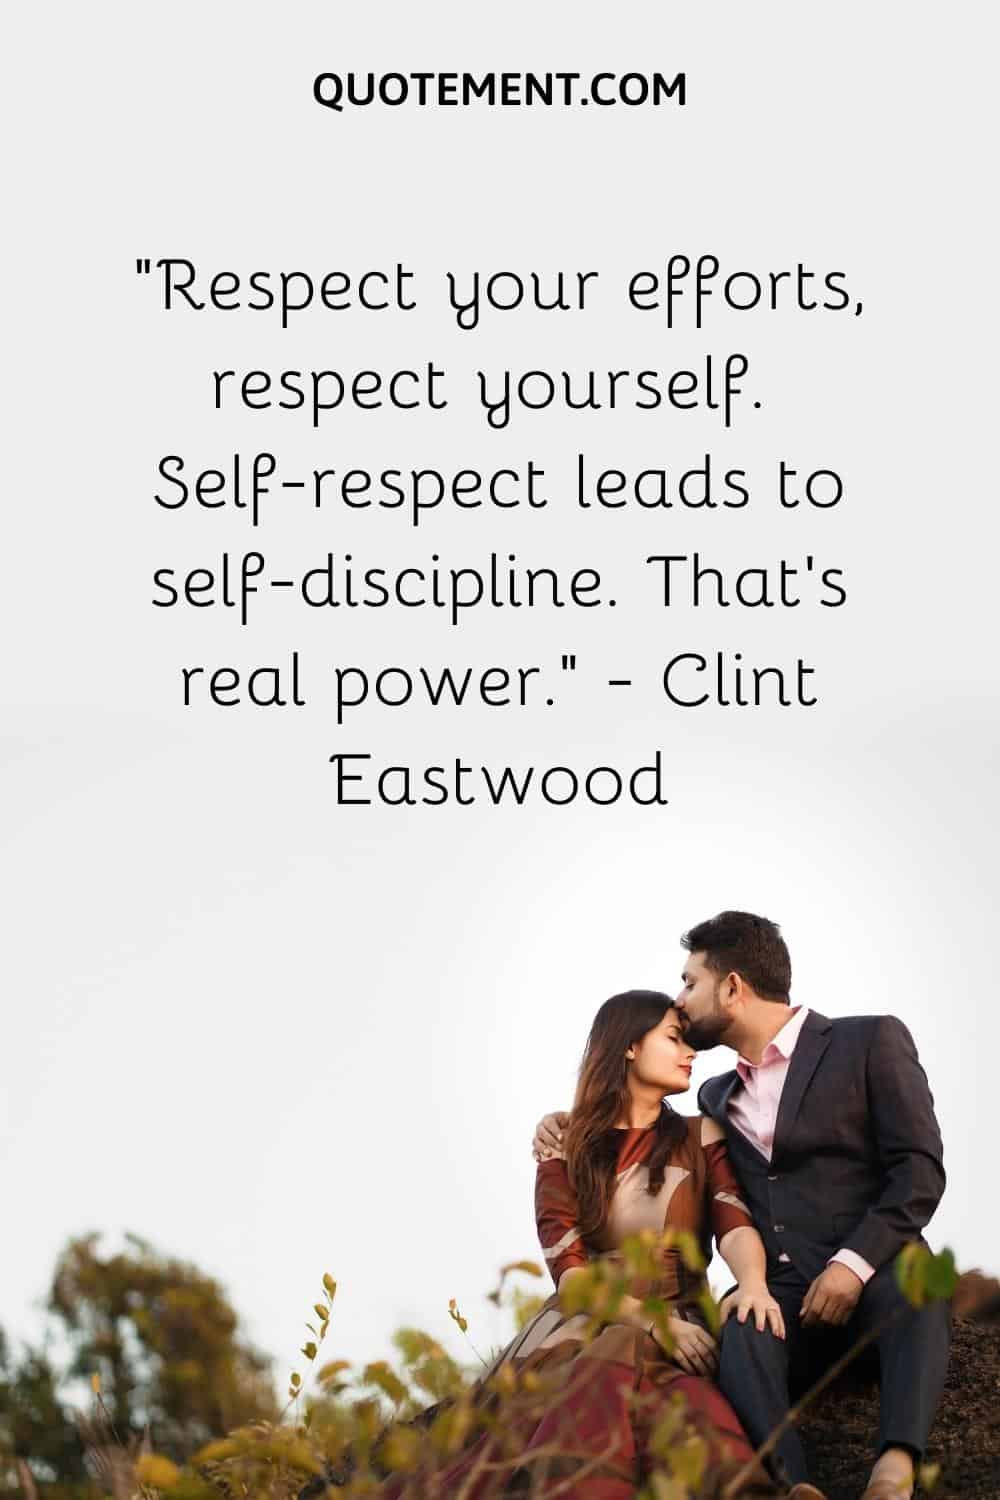 Respect your efforts, respect yourself